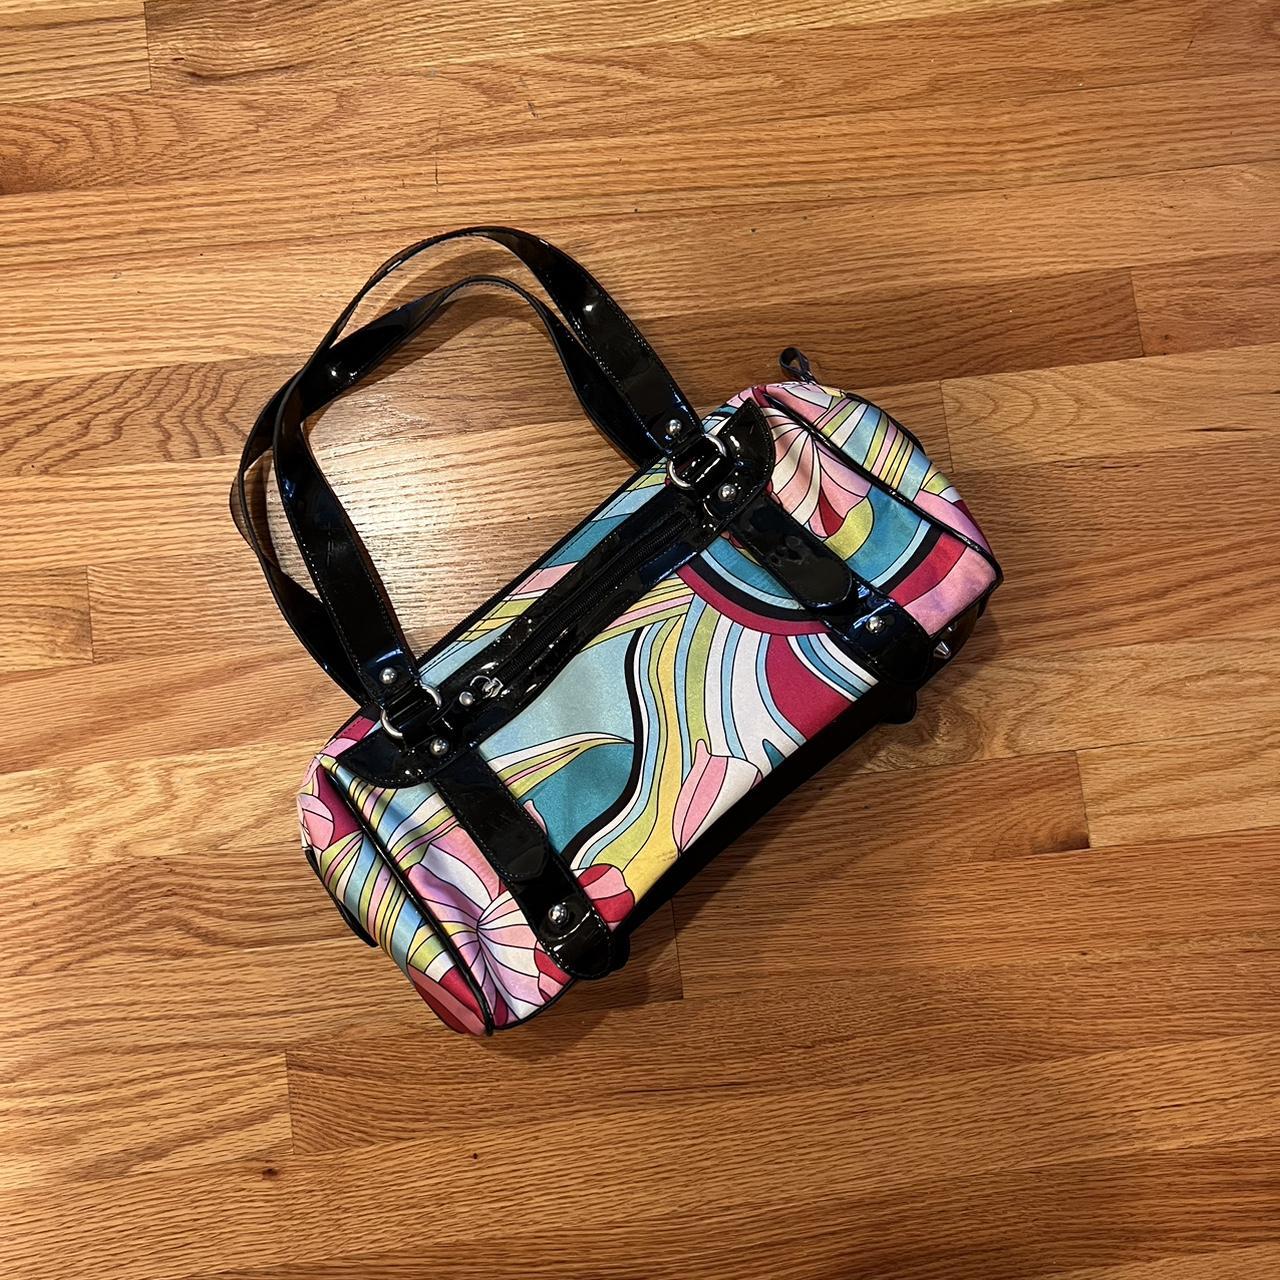 item listed by thrift_queen_nyc